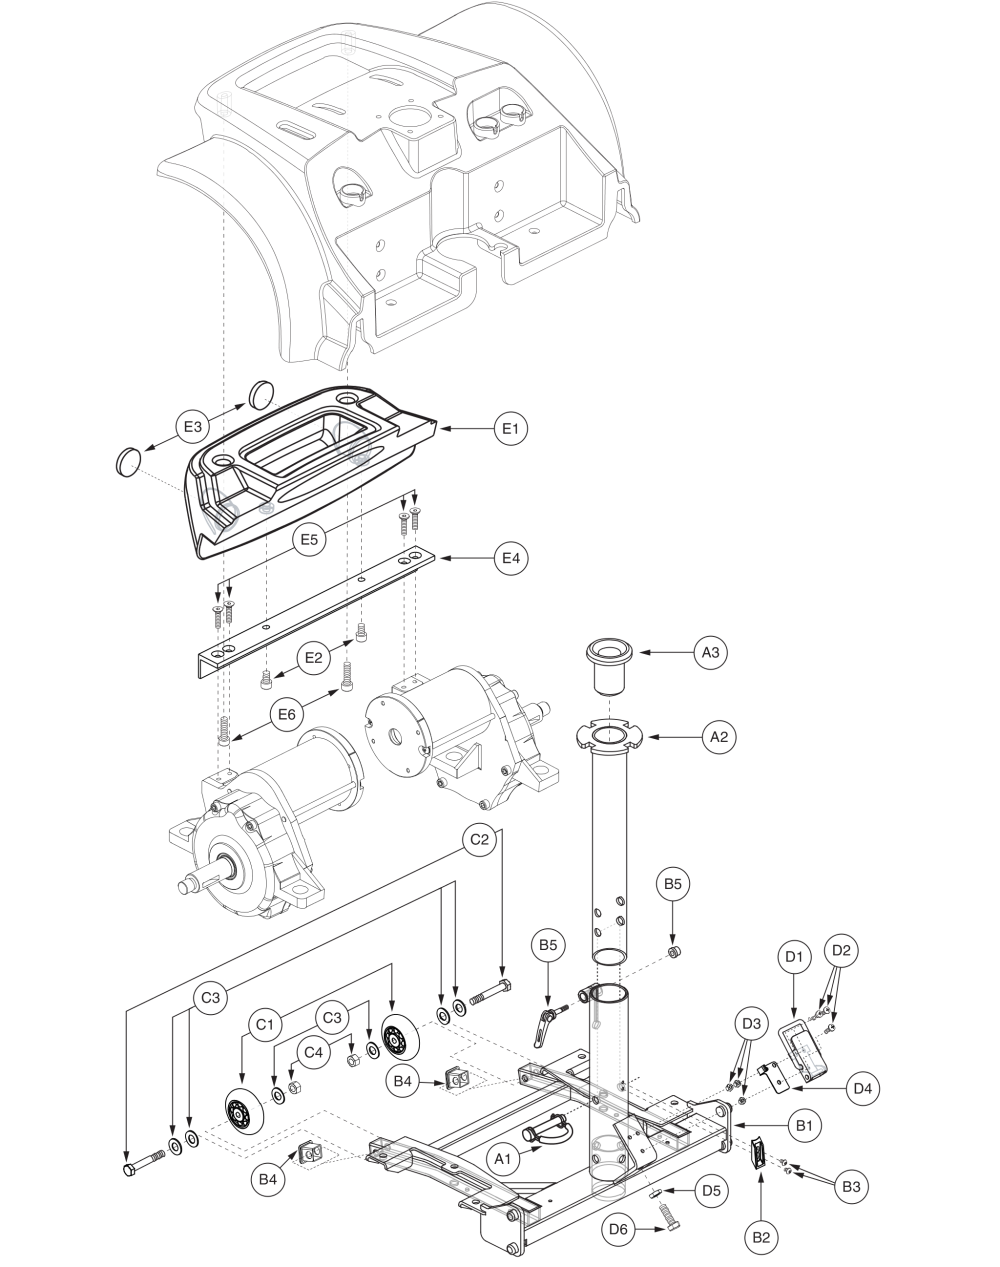 Z-chair Gc Rear Frame Assy W/ Seat Post, Bumper, And Anti-tip Assy (version 2) parts diagram